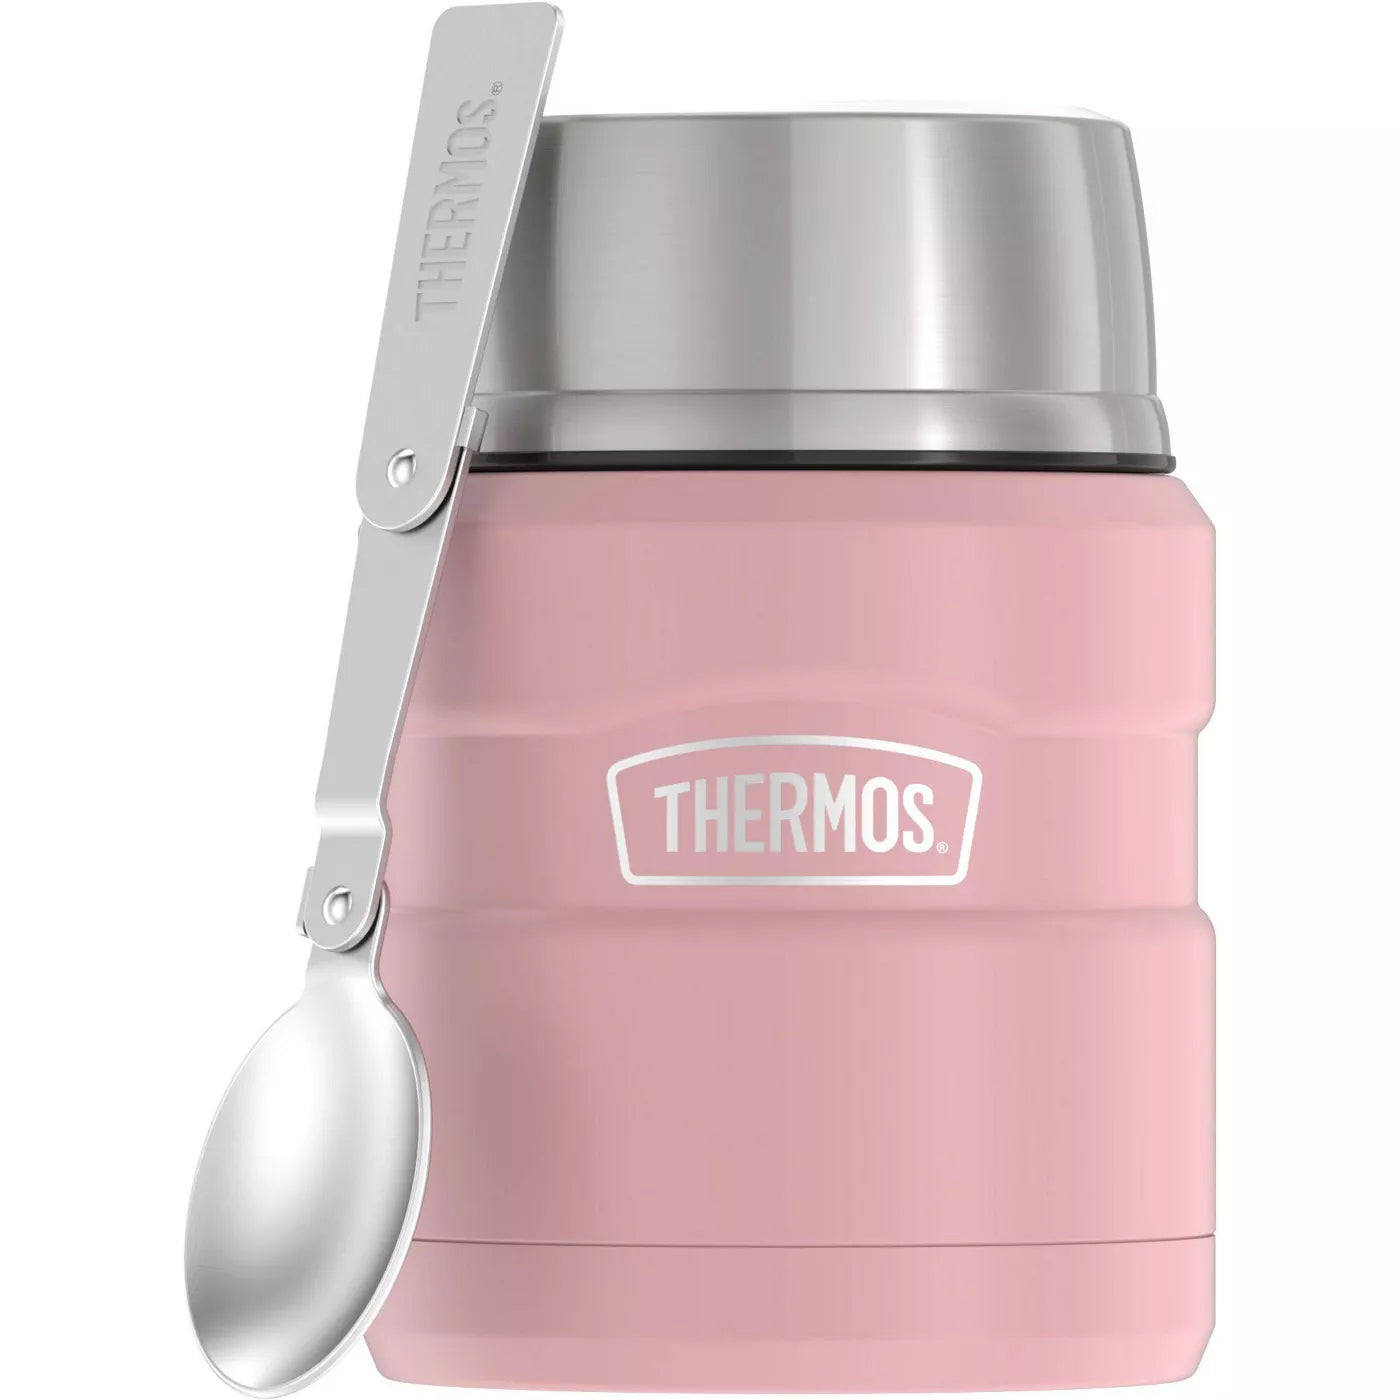 THERMOS Stainless King Vacuum-Insulated Food Jar with Spoon, 16